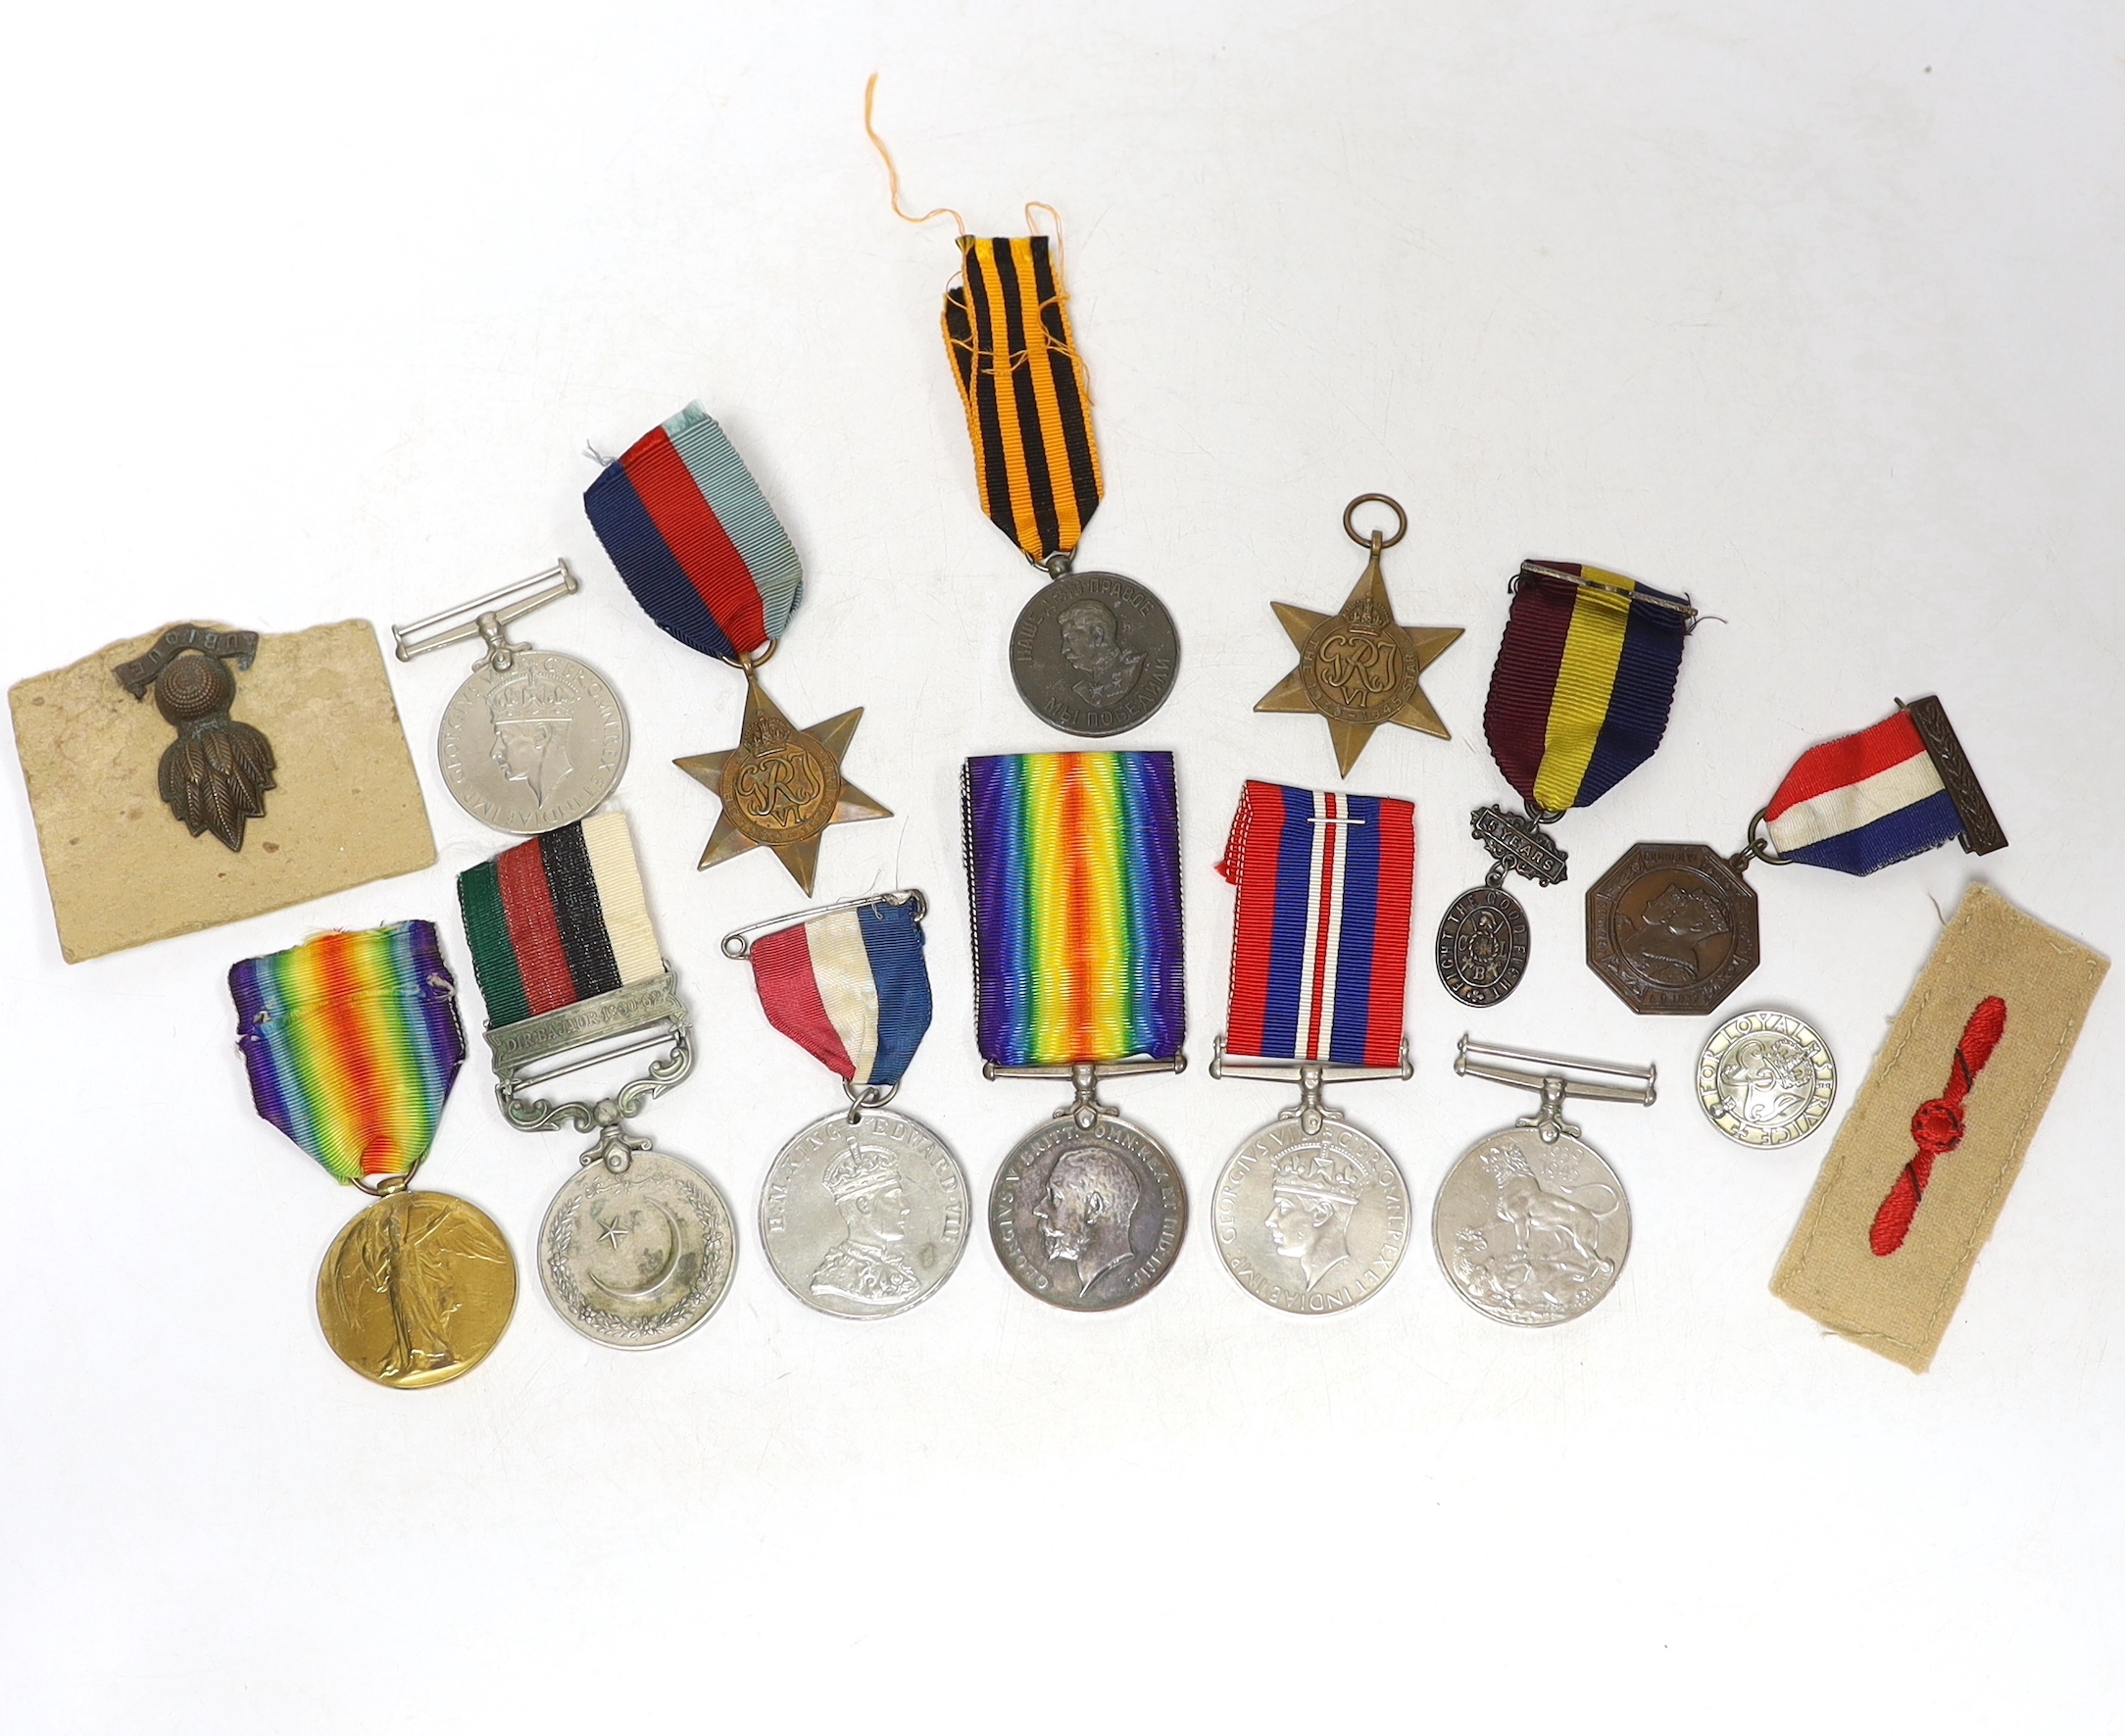 Twelve medals including; a British War Medal, a Victory Medal, three 1939-45 War Medals, two 1939-45 Stars, an Edward VIII Coronation Medal, a Soviet Stalin Victory medal, a Pakistan General Service Medal, a George VI Co